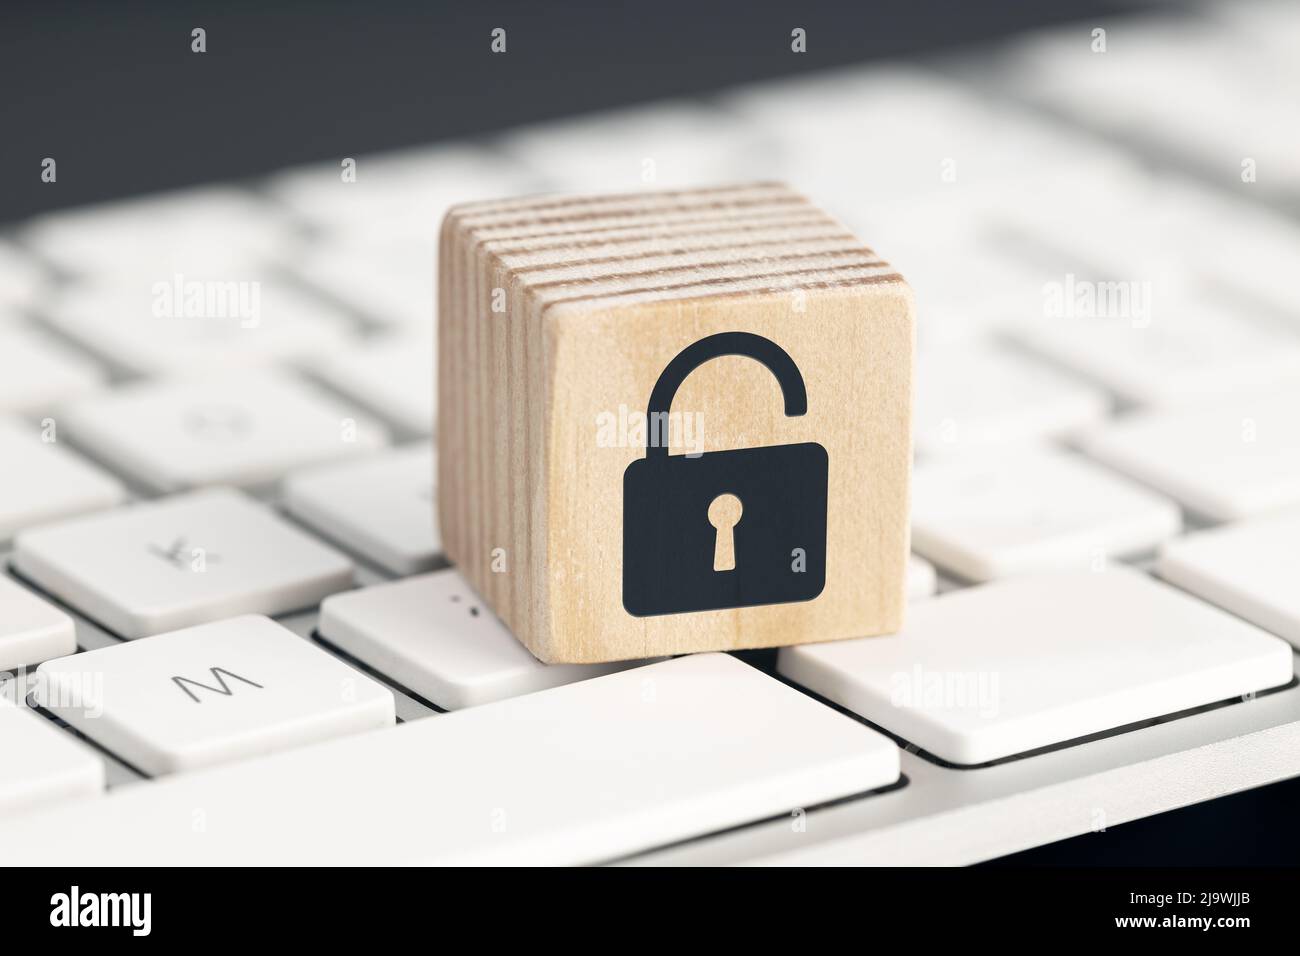 Computer security risk concept. Open padlock icon on wooden cube on computer keyboard Stock Photo